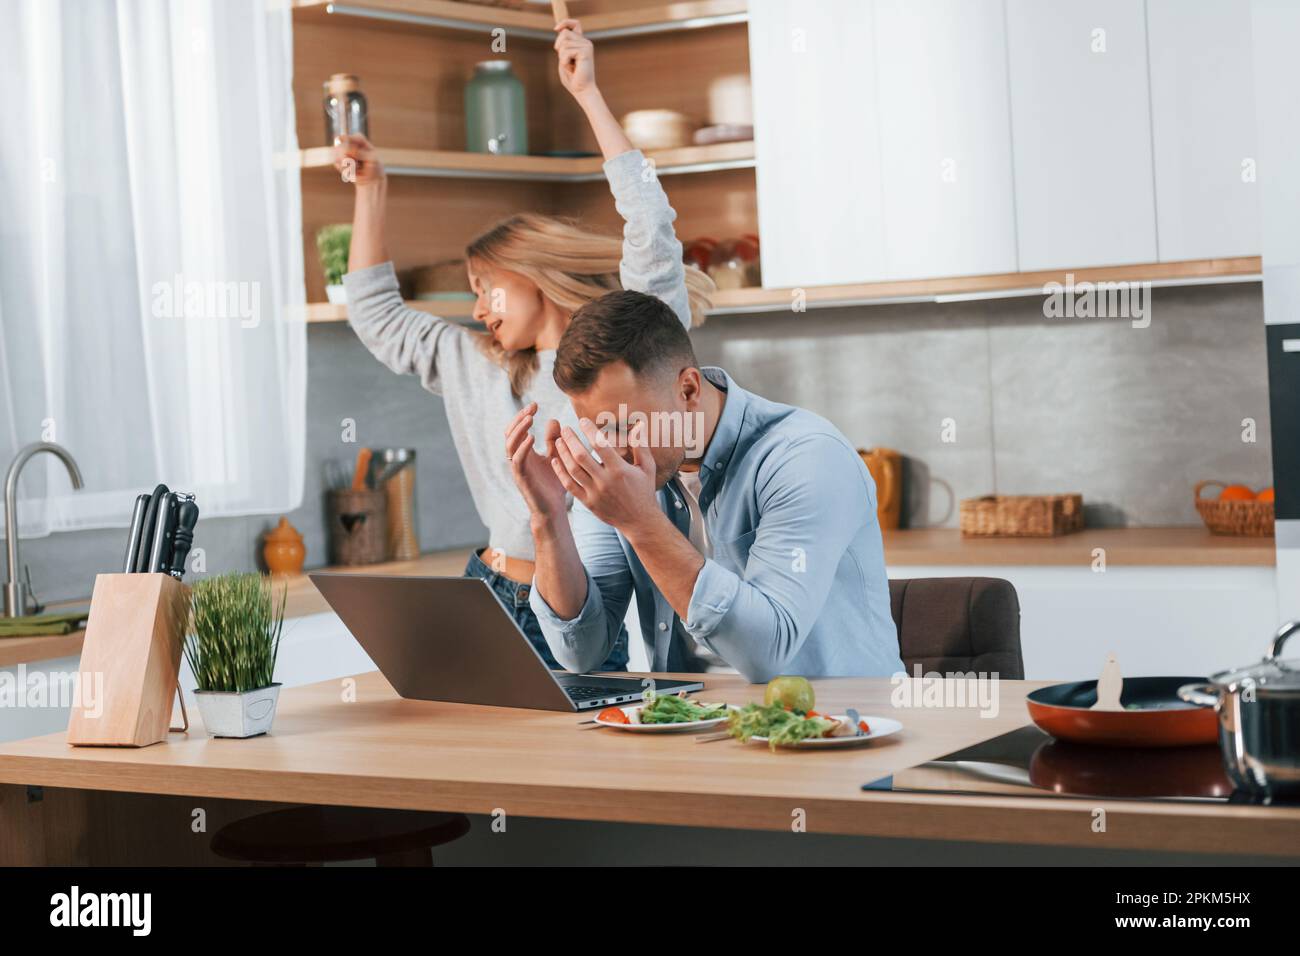 Modern laptop is on the table. Couple preparing food at home on the modern kitchen. Stock Photo